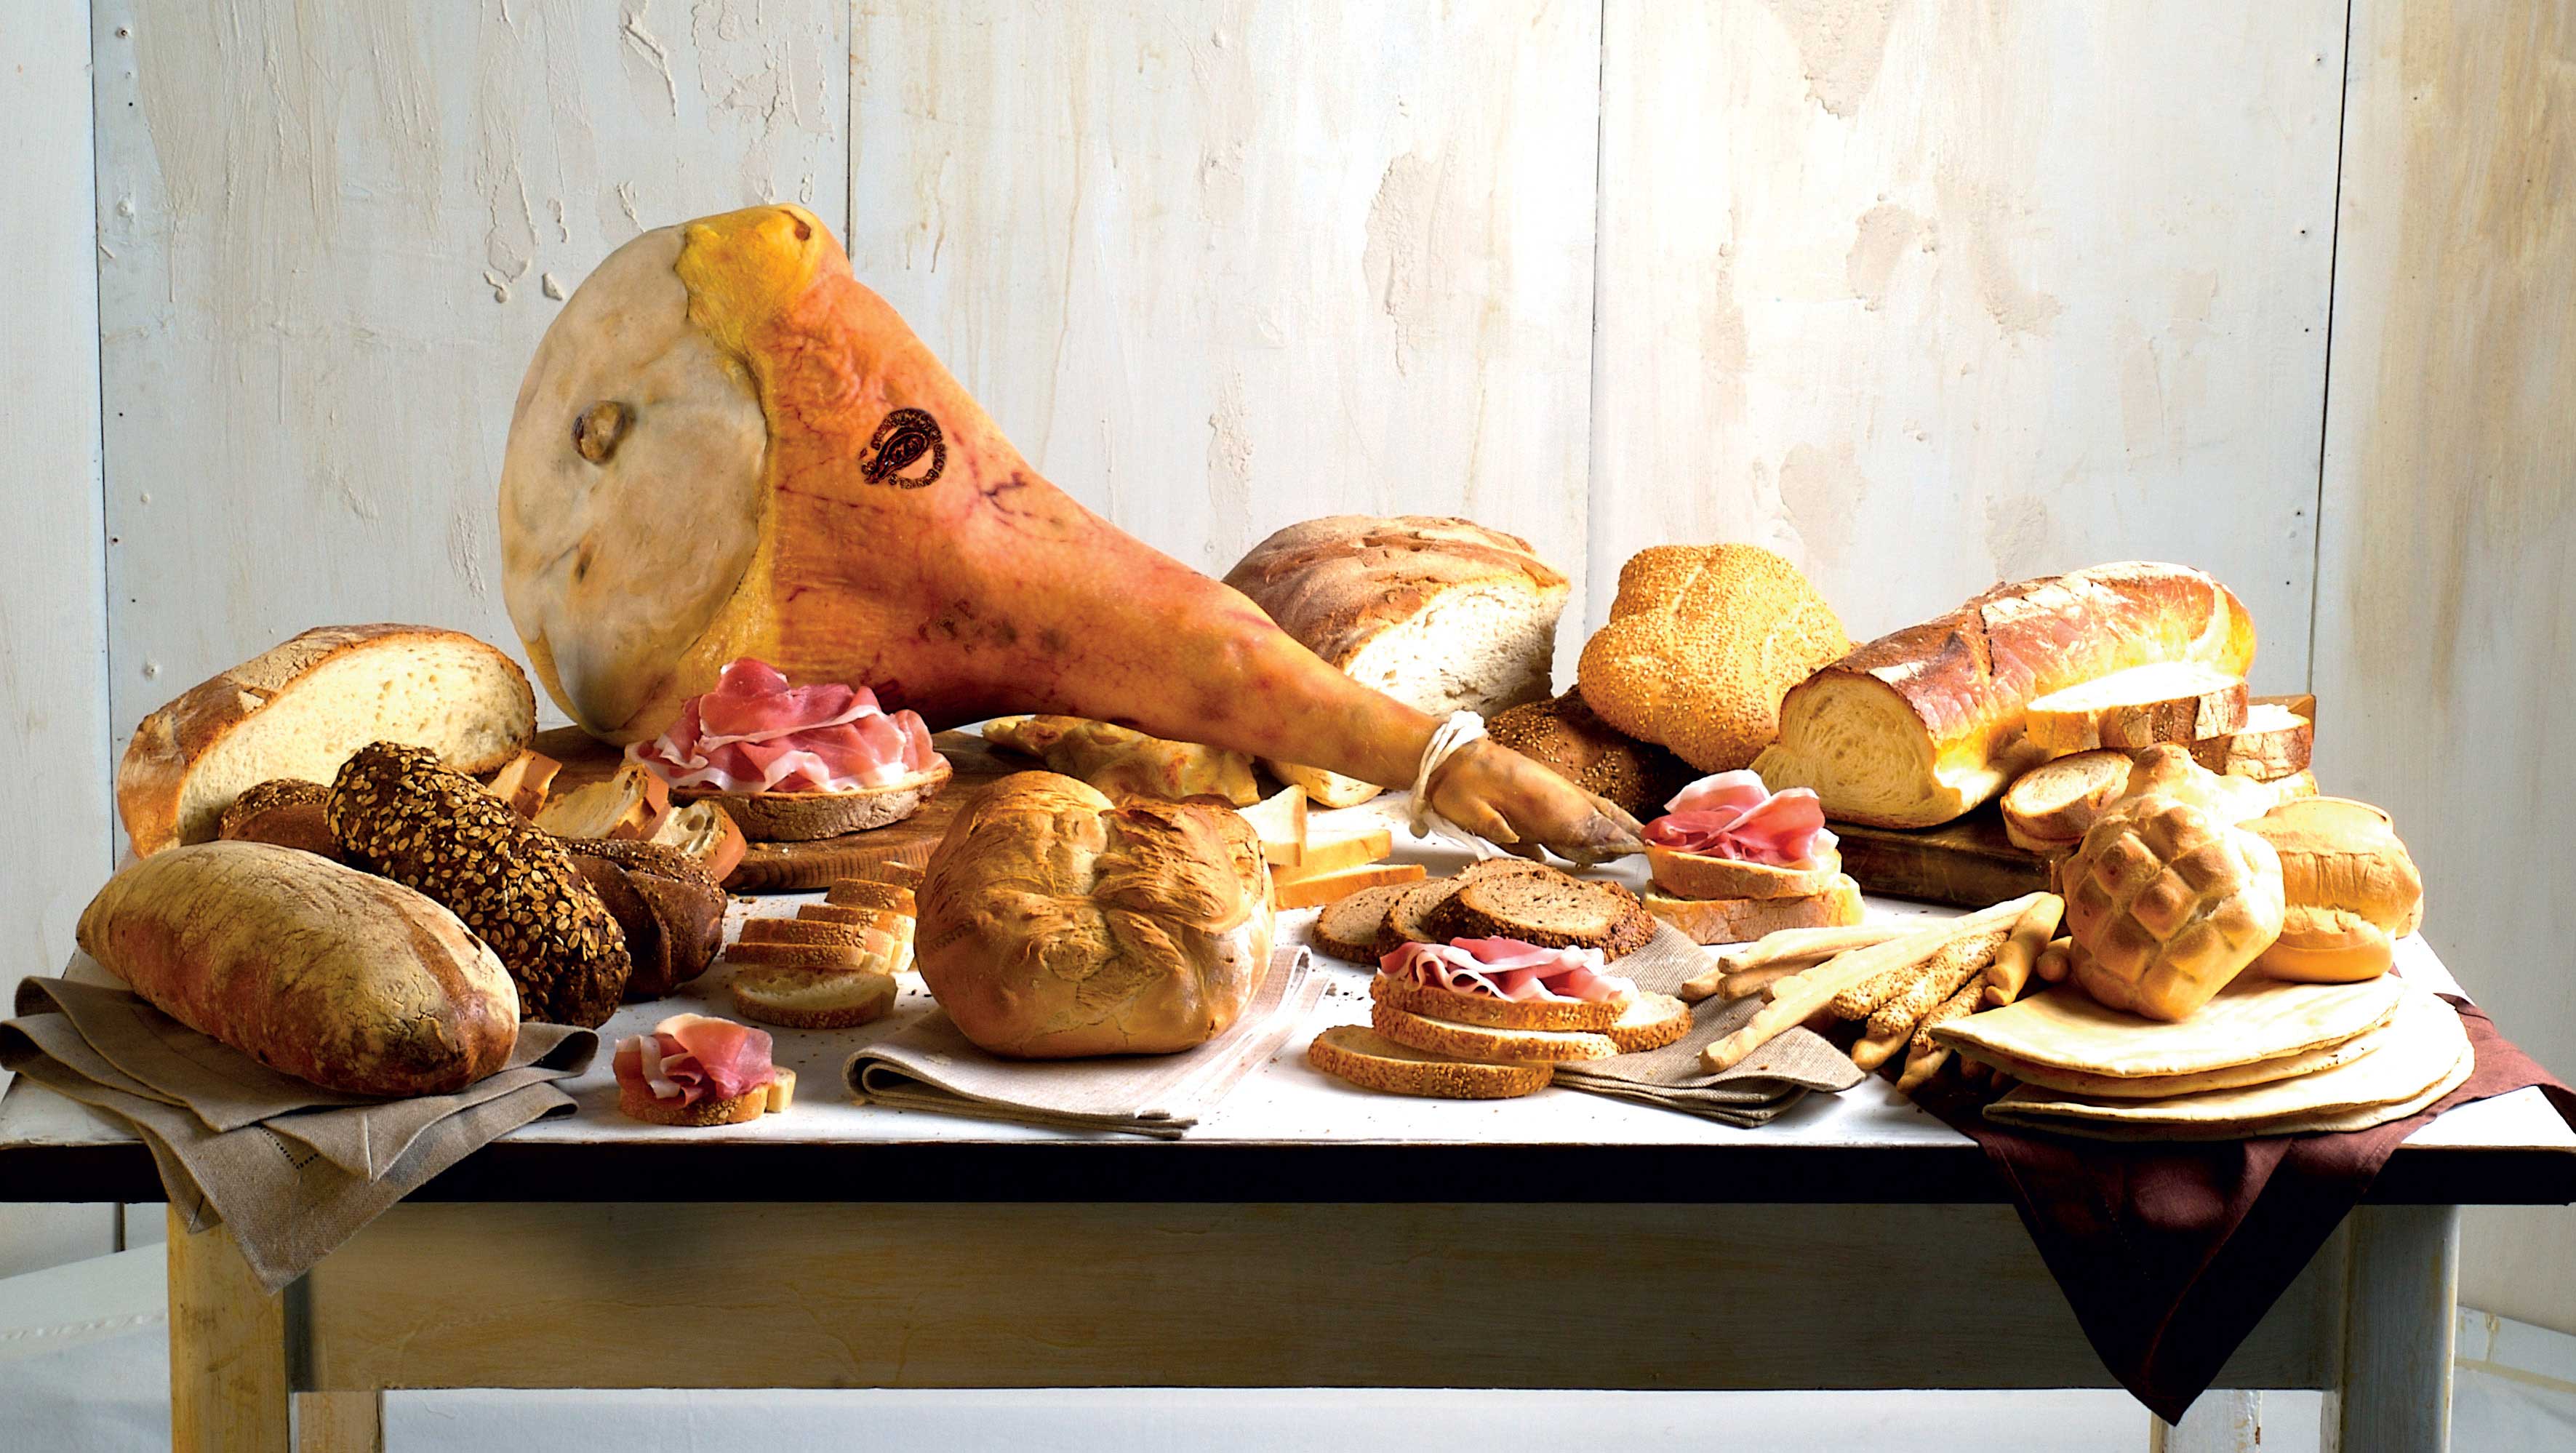 Bread and Prosciutto – the perfect pairing